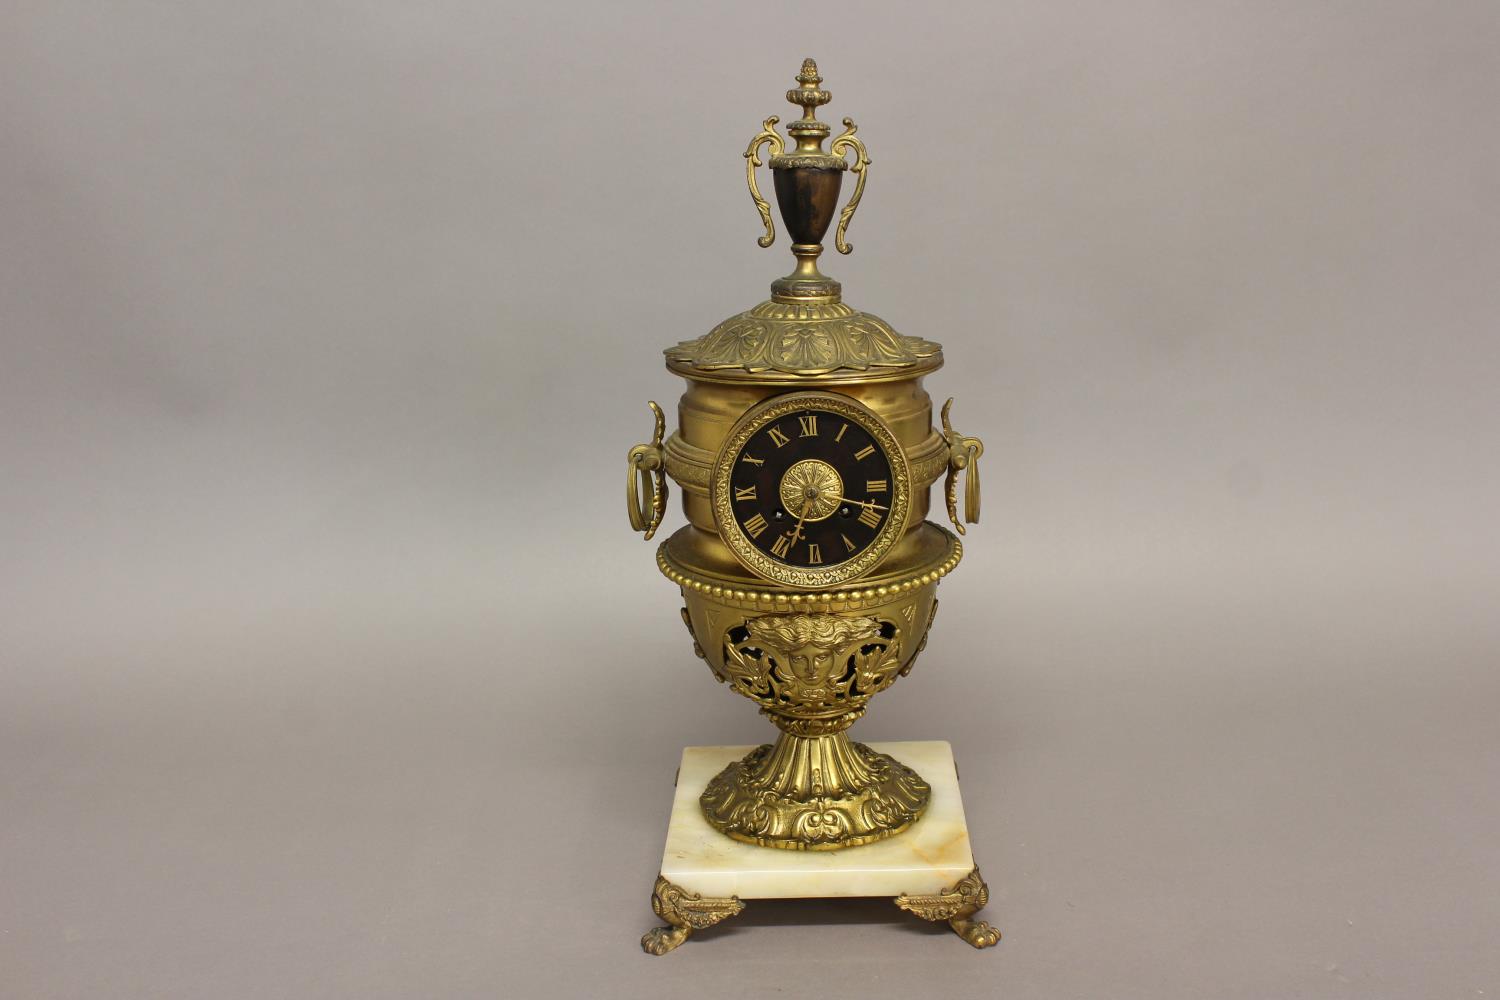 AN ELABORATE URN SHAPED MANTEL CLOCK. The clock with a black dial with gilt Roman numerals, with